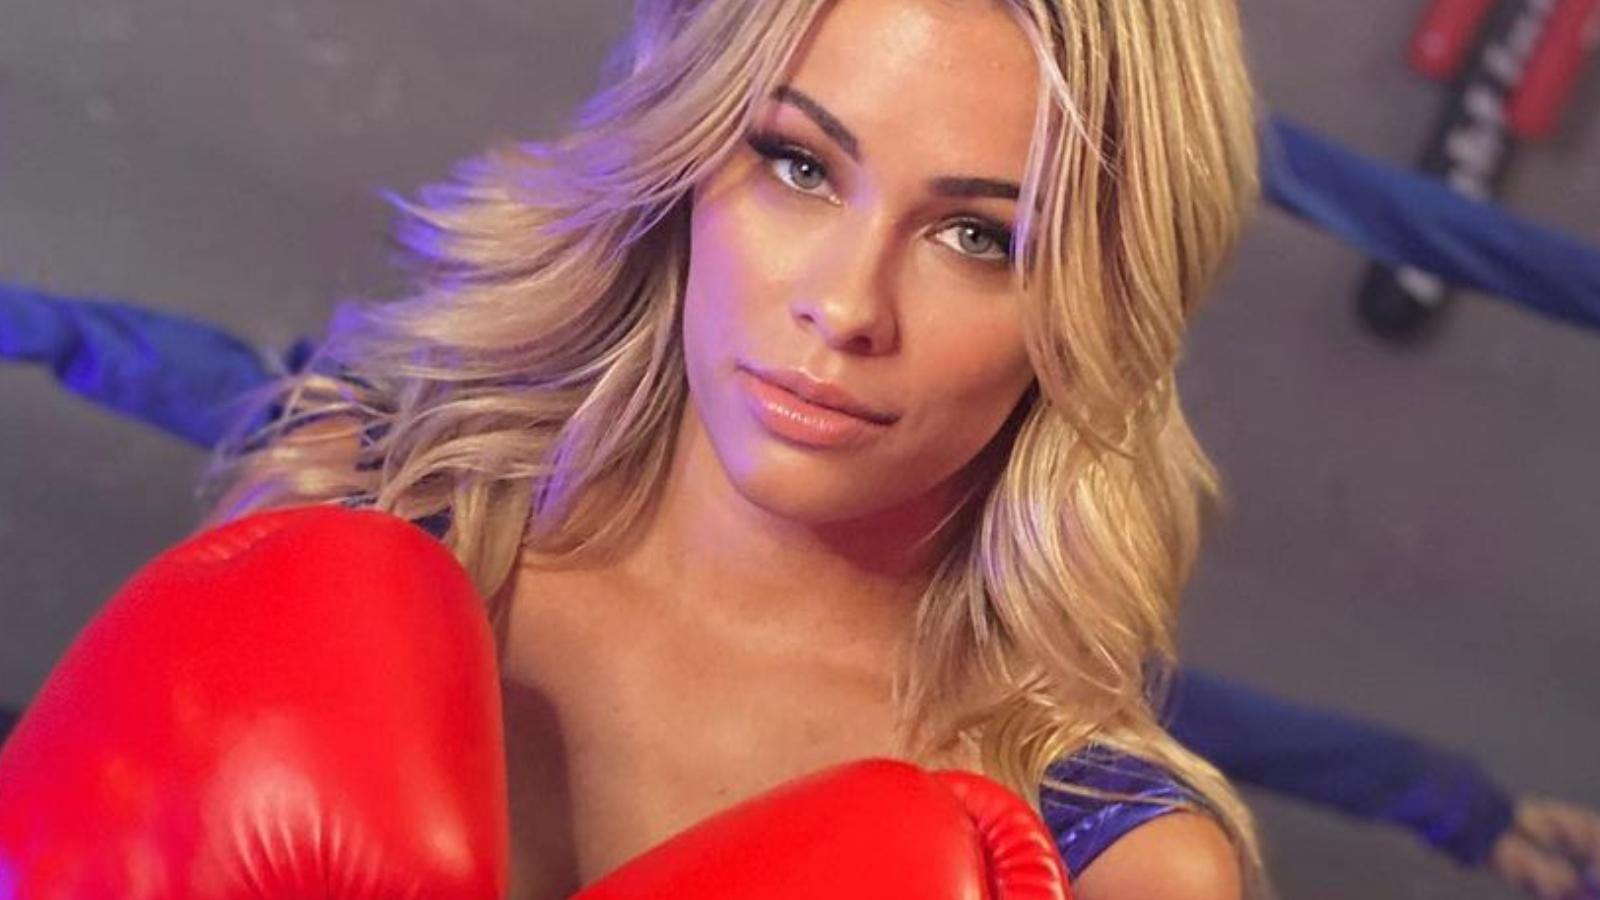 ufc fighter paige vanzant holding boxing gloves